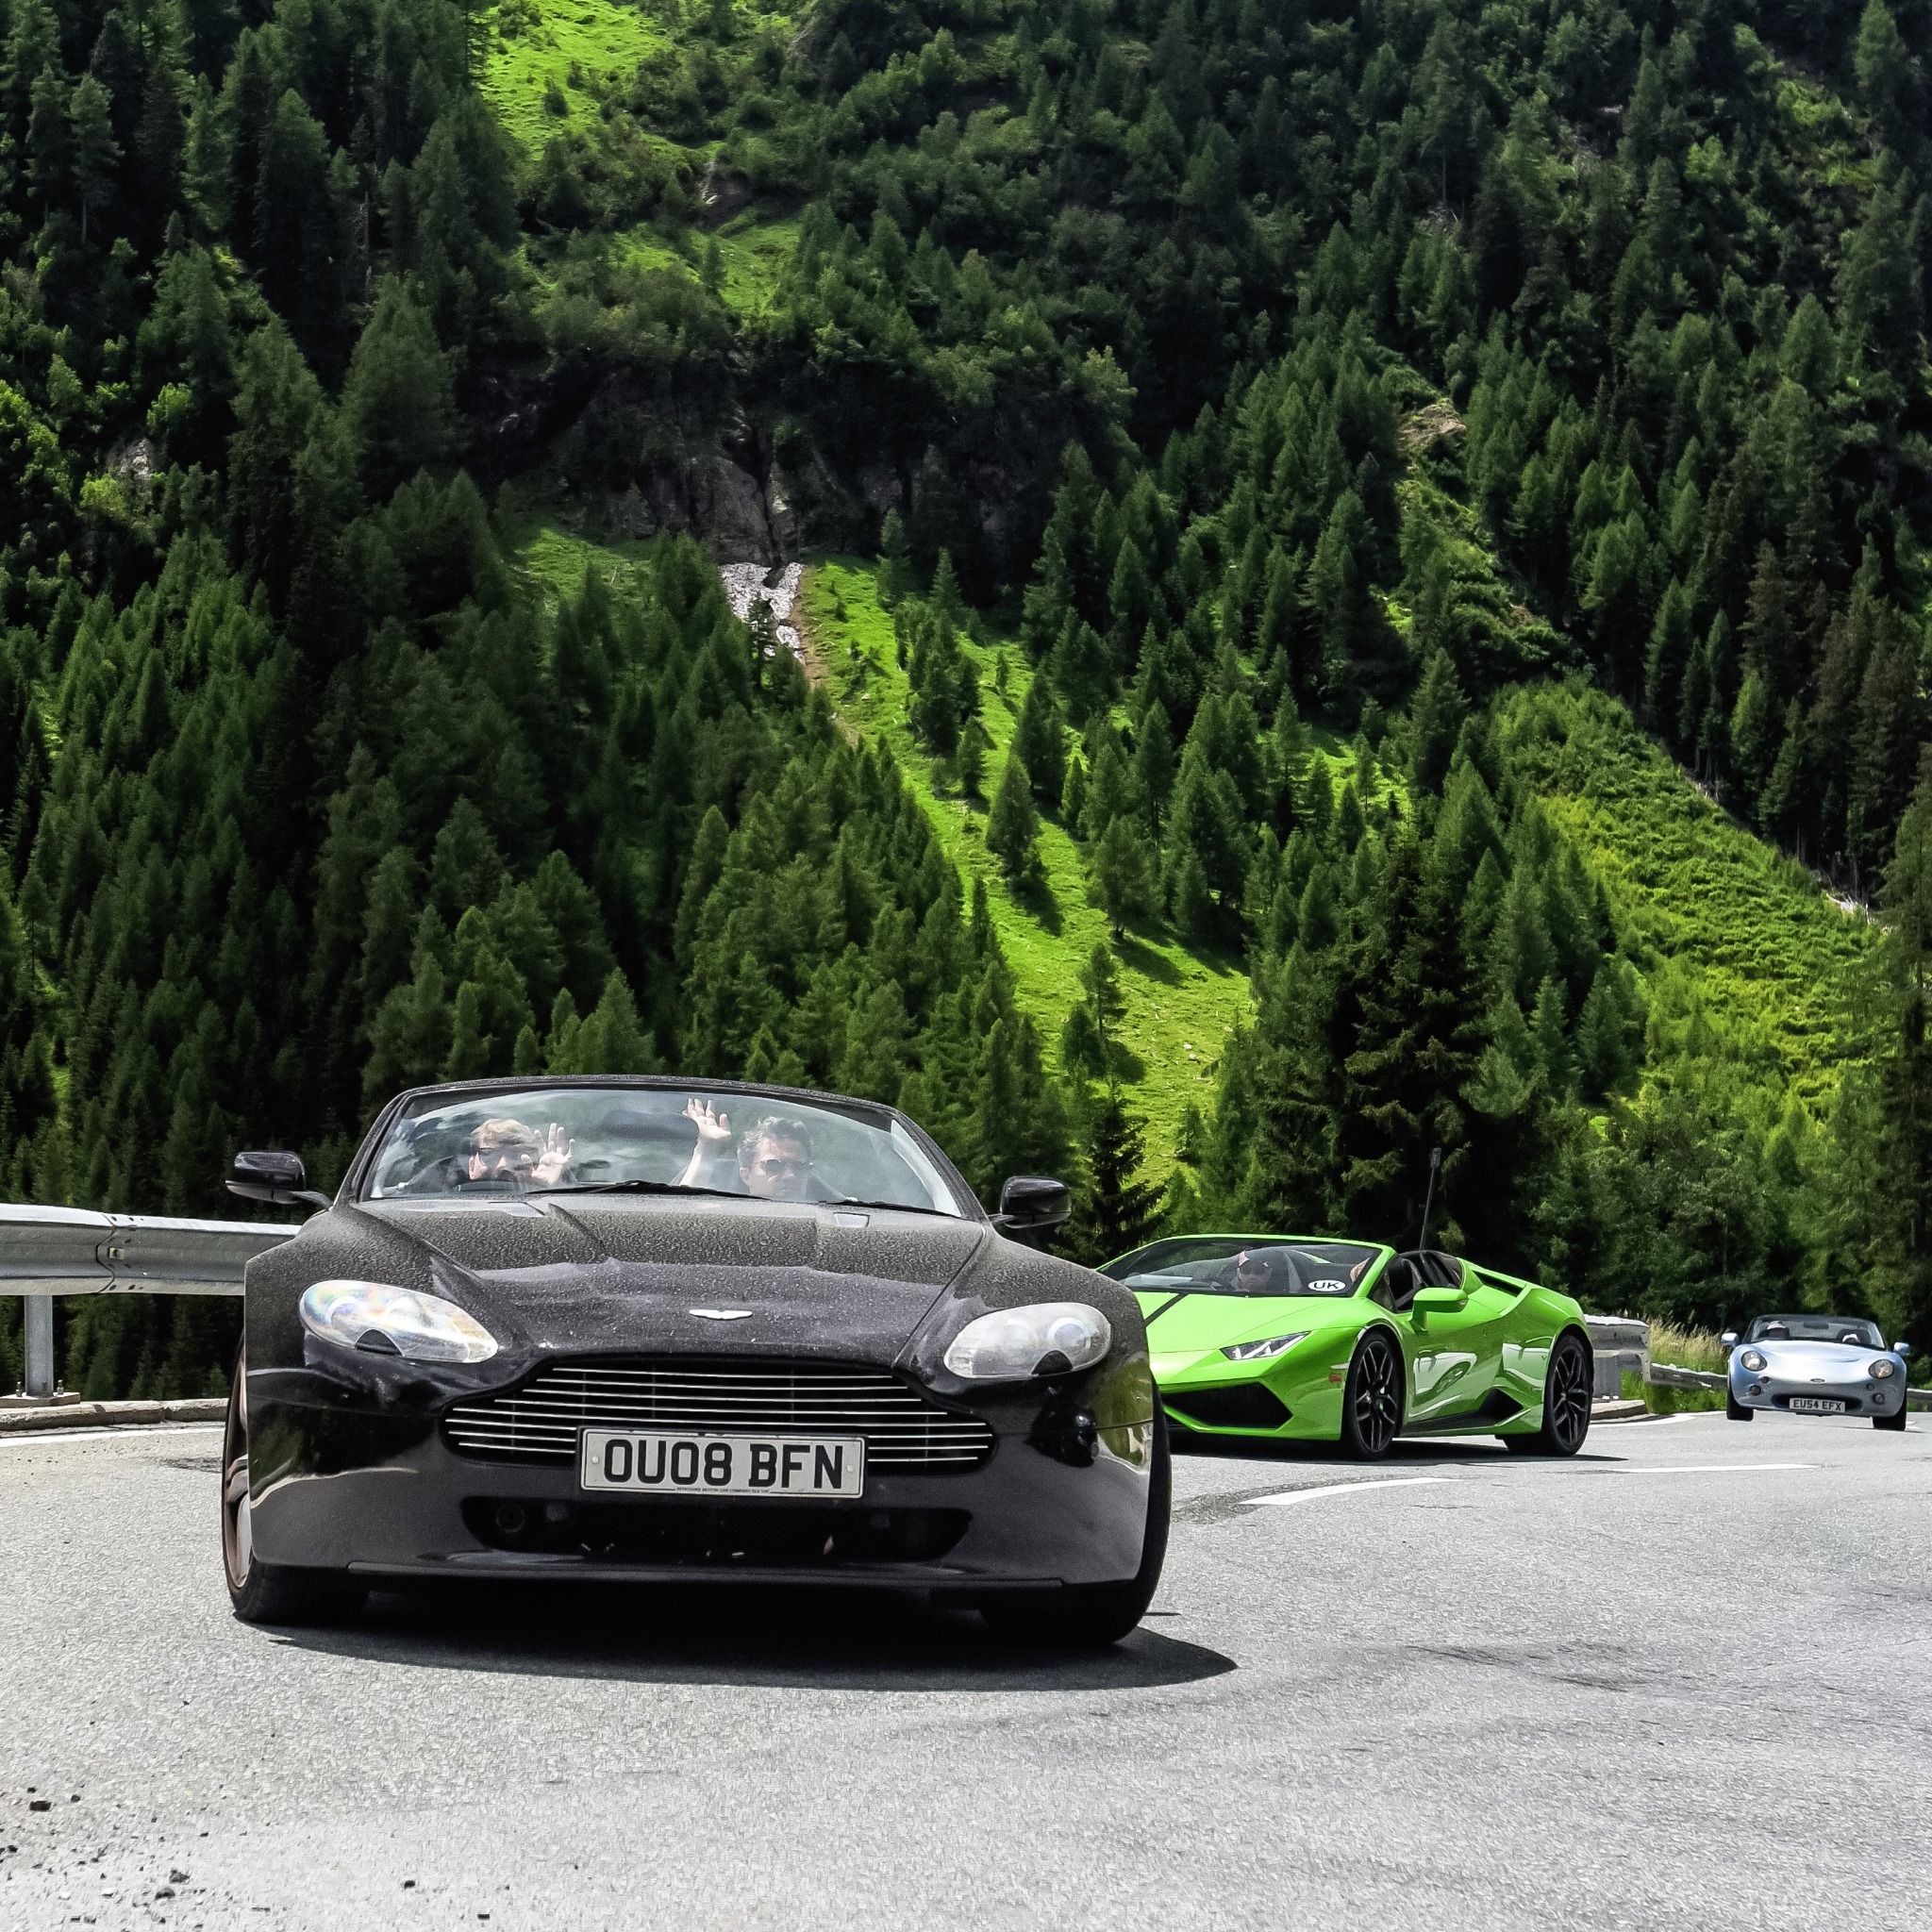 Black Aston martin driving on a road with couple waving